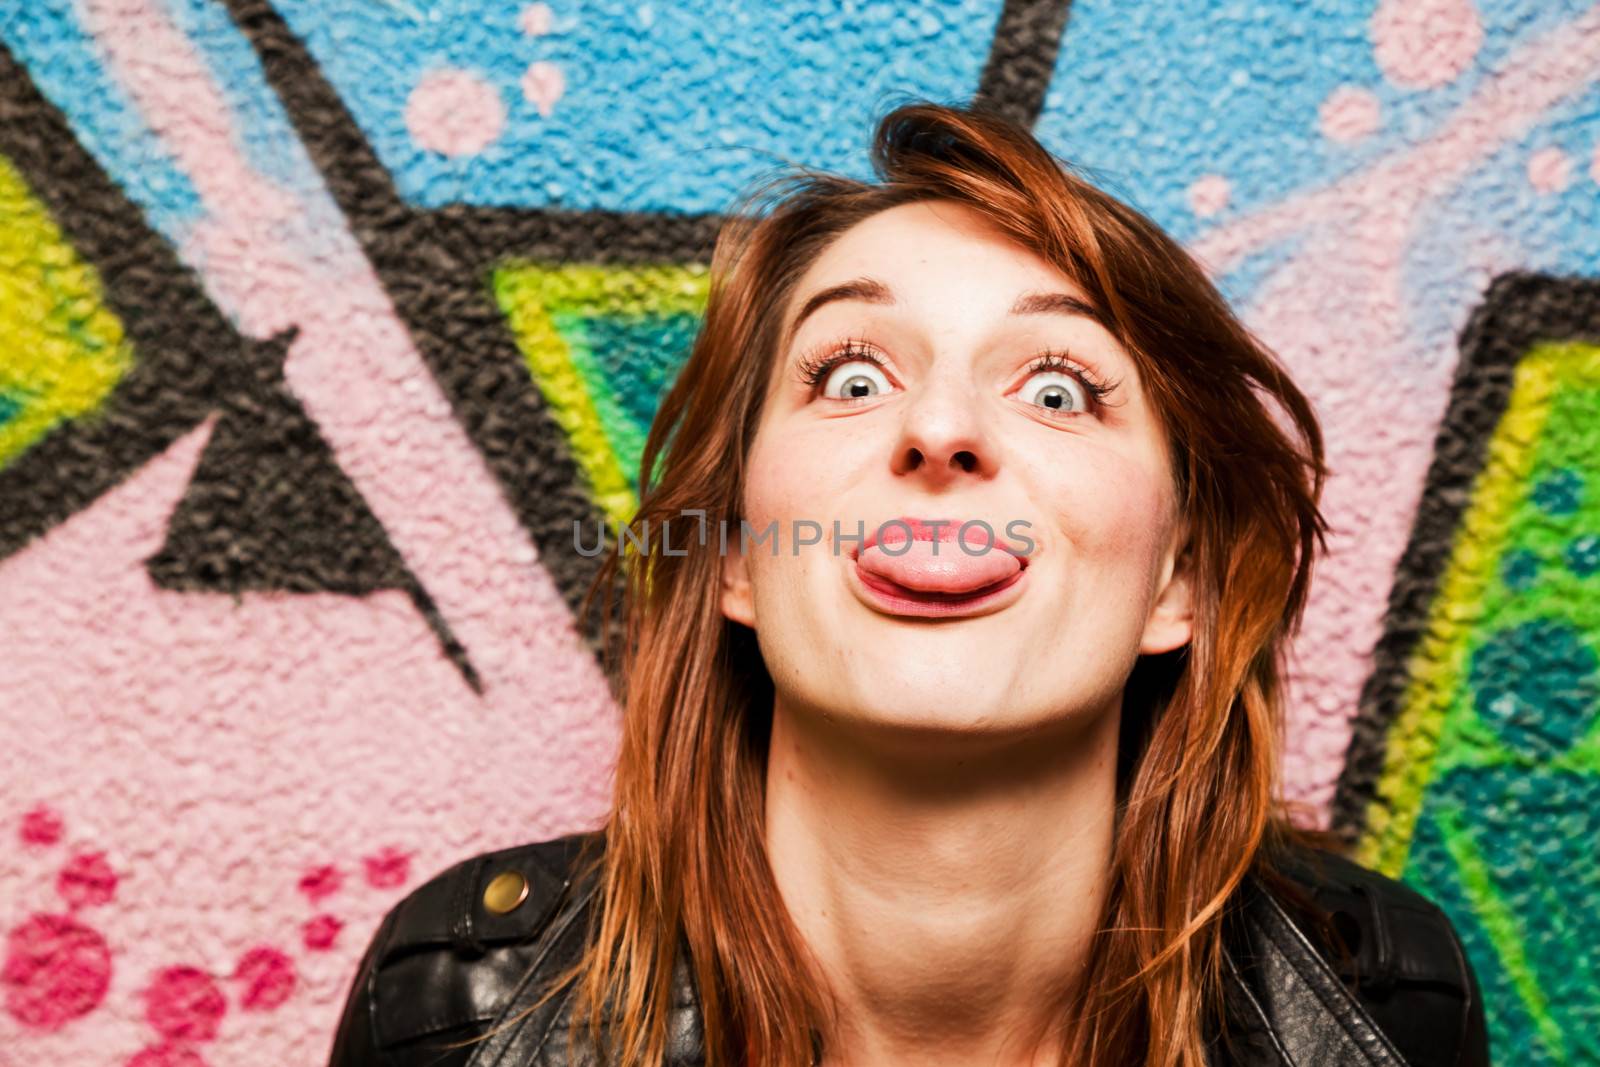 Stylish girl poking out her tongue against graffiti wall by photocreo